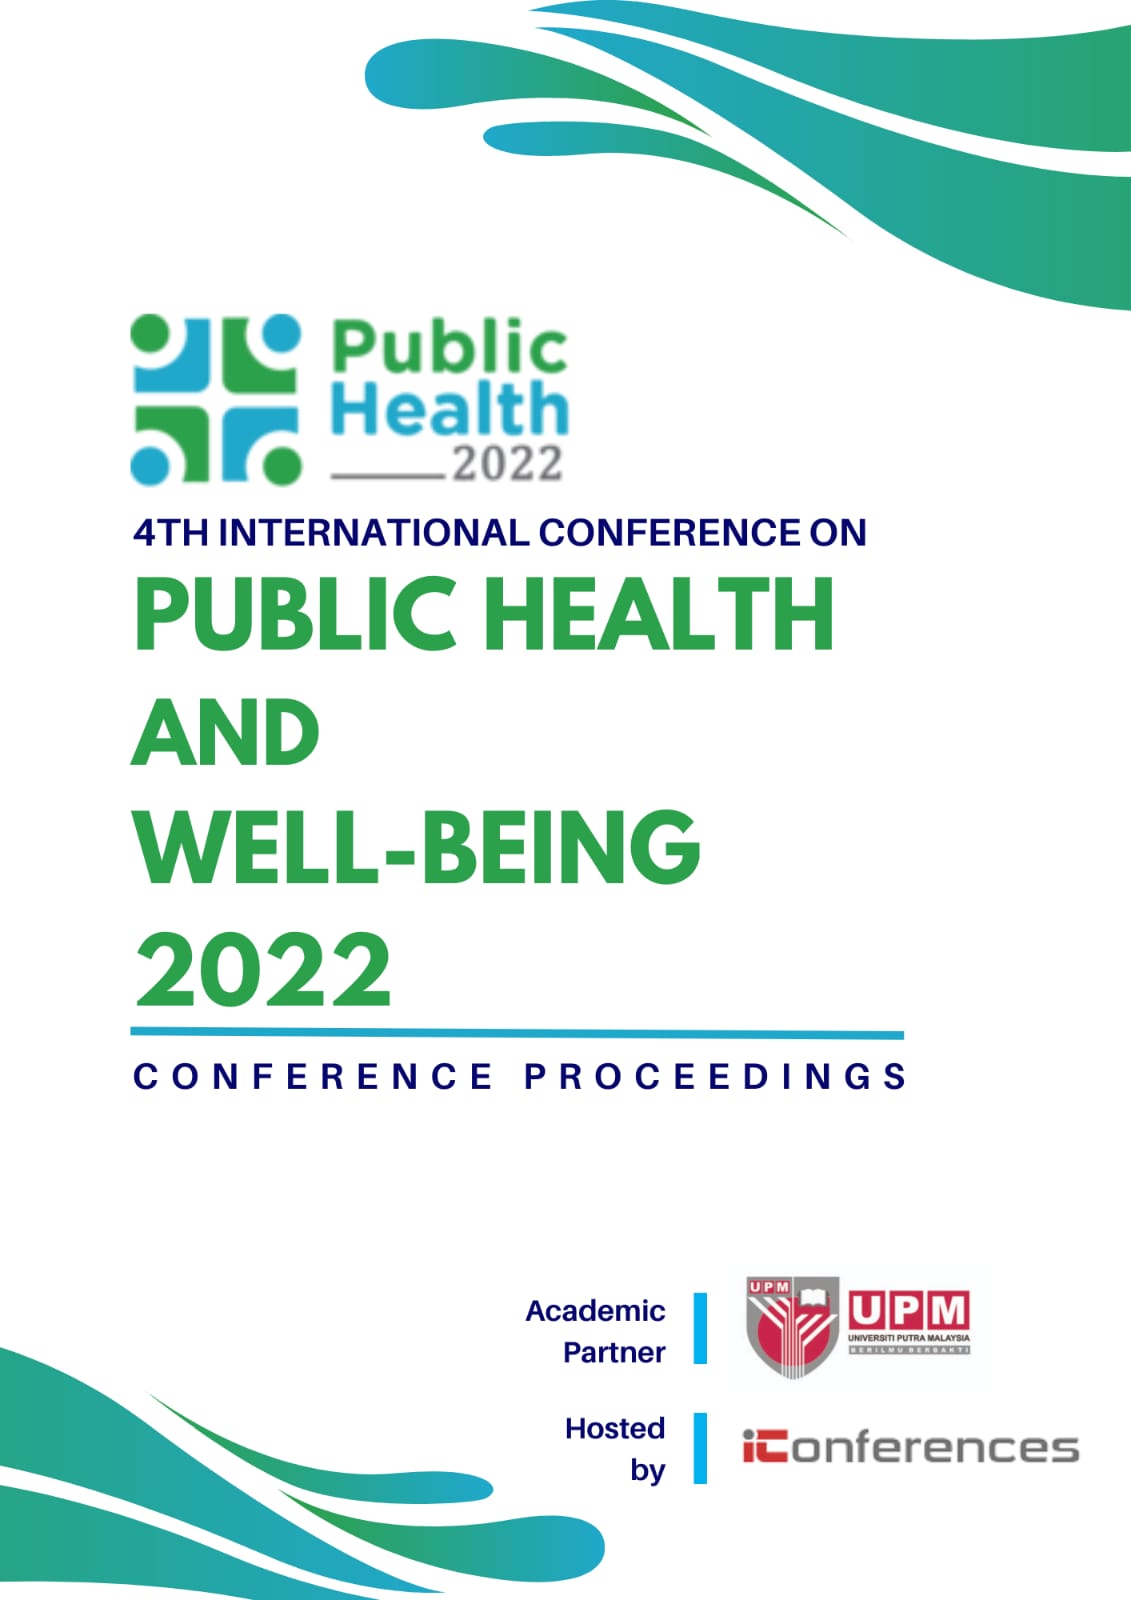 Conference proceedings of the public health conference